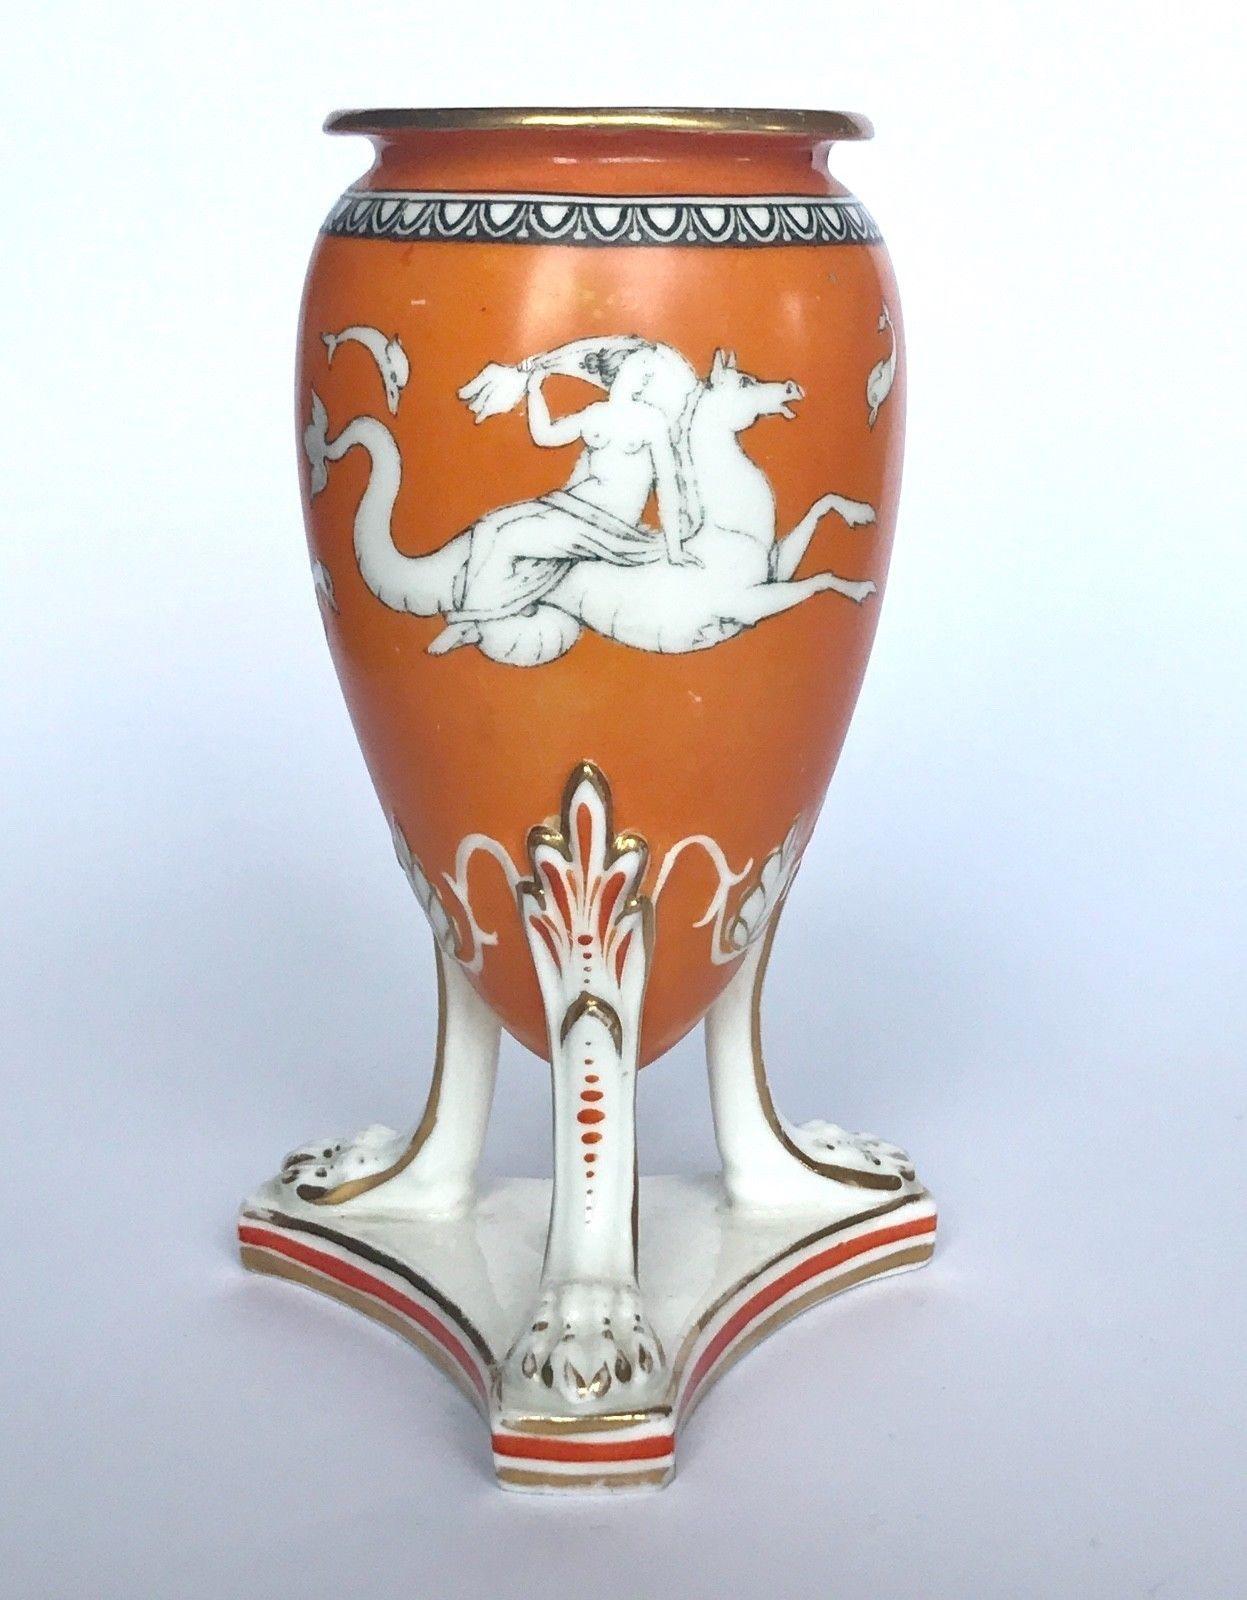 A Samuel Alcock porcelain neoclassical Revival Amphora vase, circa 1855, decorated with classical maidens riding hippocamp against an orange ground all supported on tri legged support.
The last  two images shows a group of other Alcock vases that